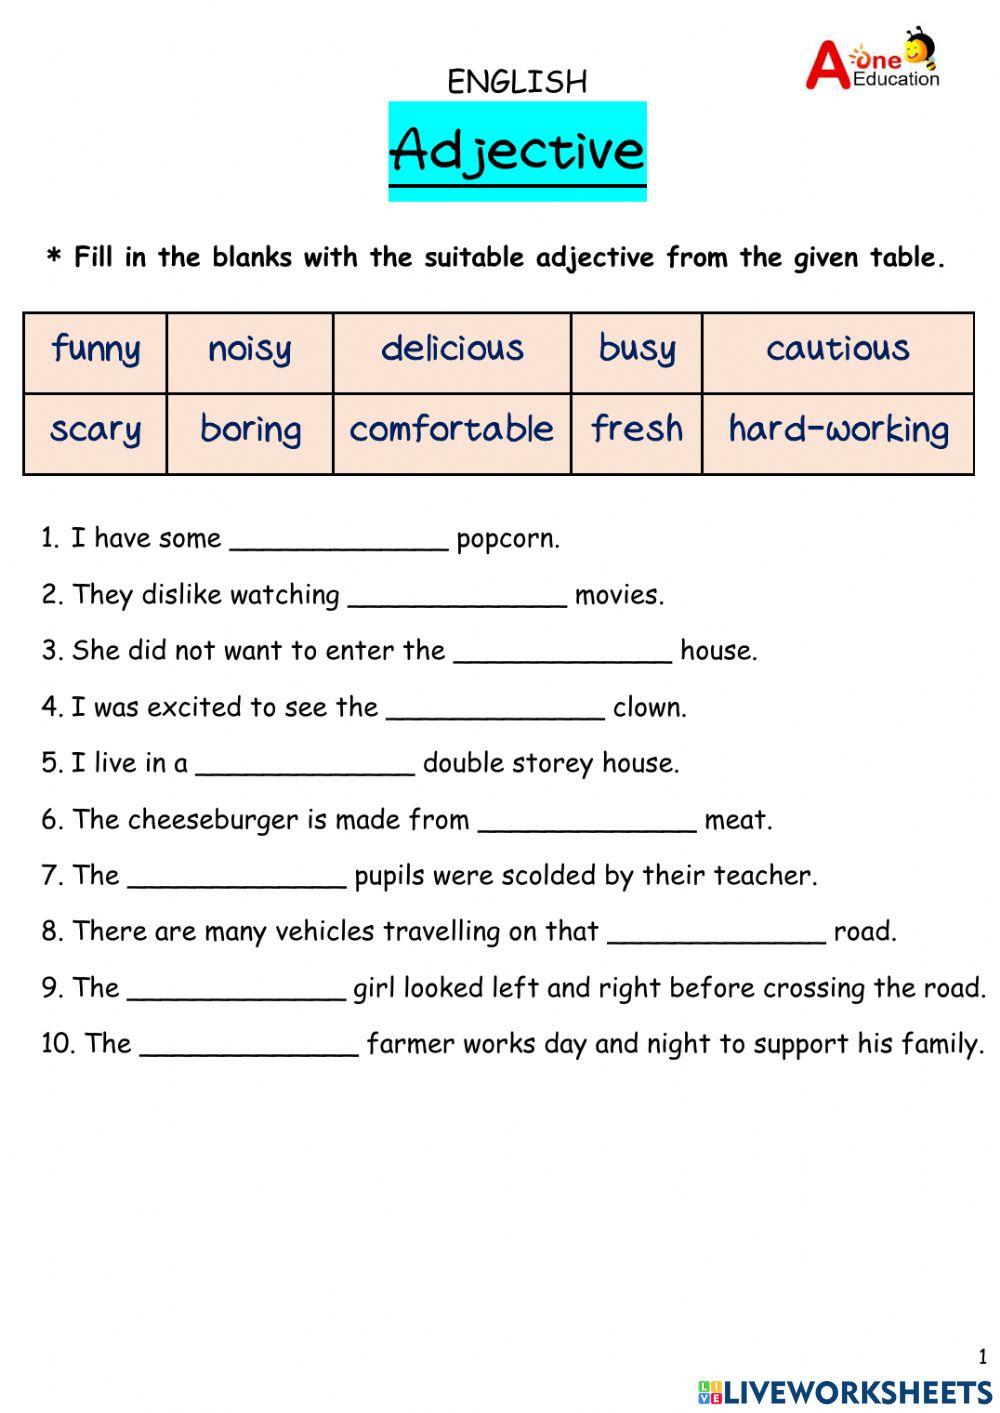 Adjective interactive worksheet for Year 4 | Live Worksheets